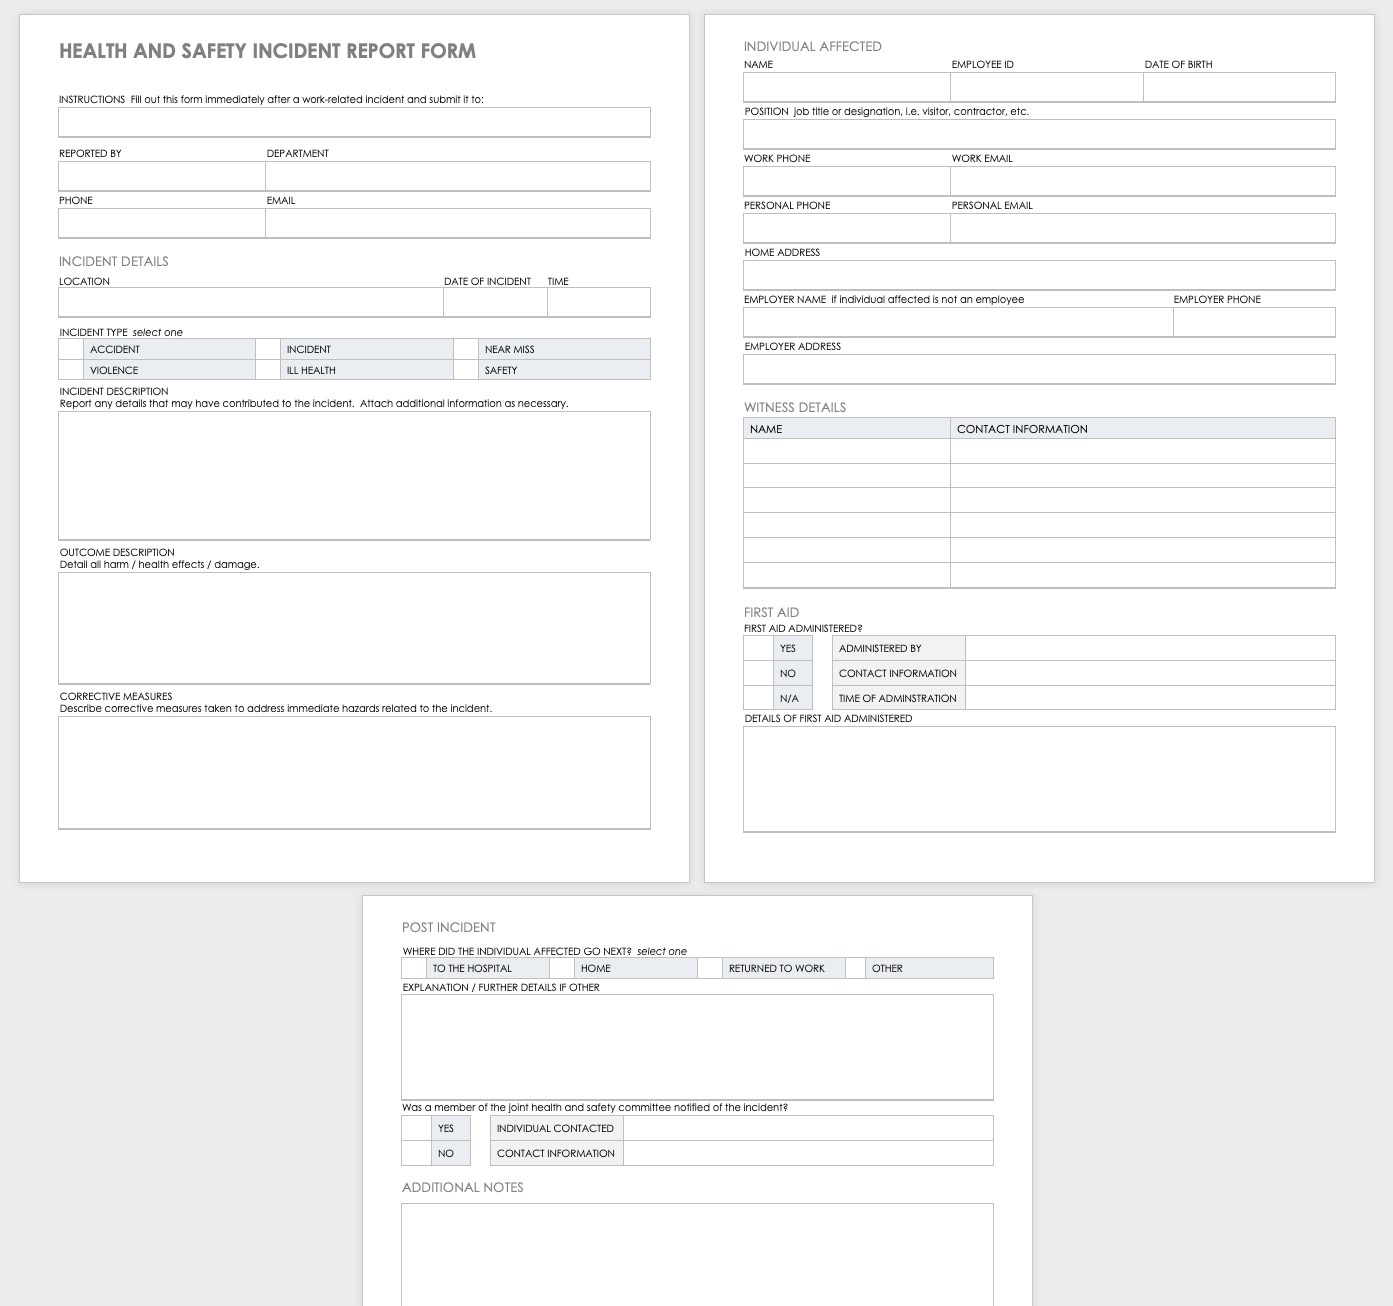 Free Workplace Accident Report Templates | Smartsheet Within Health And Safety Incident Report Form Template